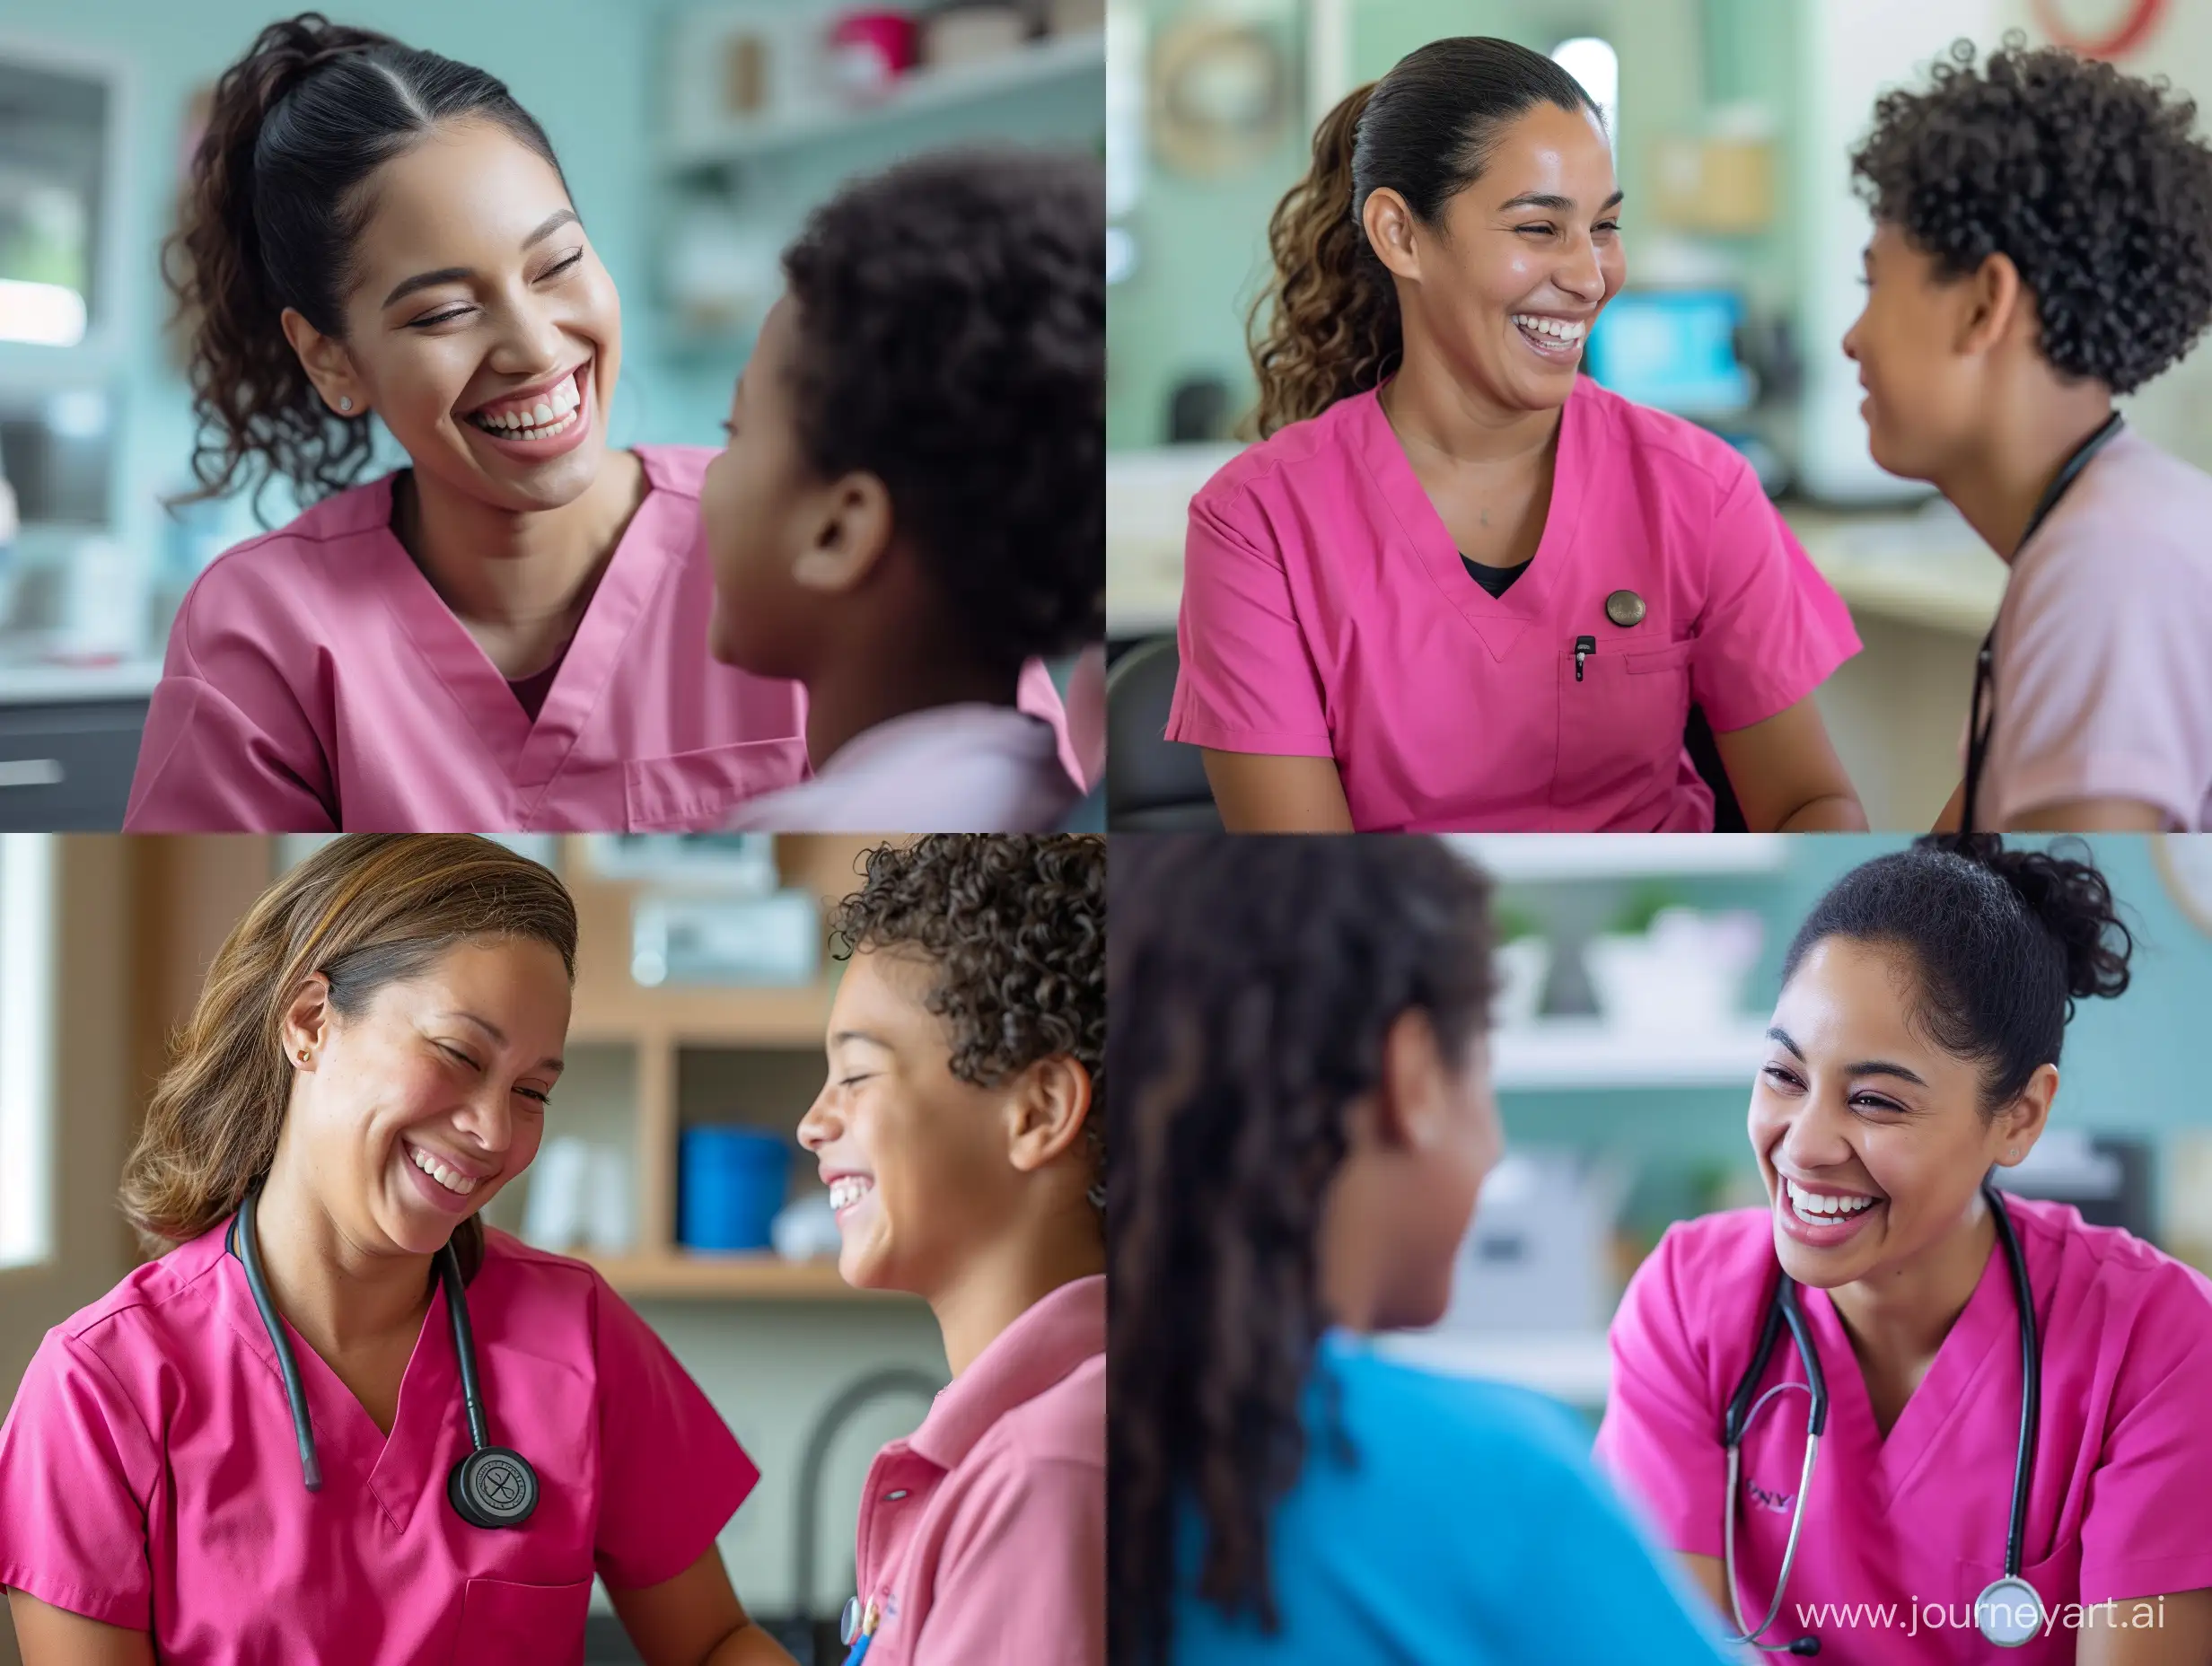  A kind female doctor wearing a pink scrub top happily examining a young smiling patient at an upbeat community health clinic, caring, joy, healthcare, clinical, Sony α7R IV, f/1.8 lens, portrait, --style raw --ar 4:3 --v 6